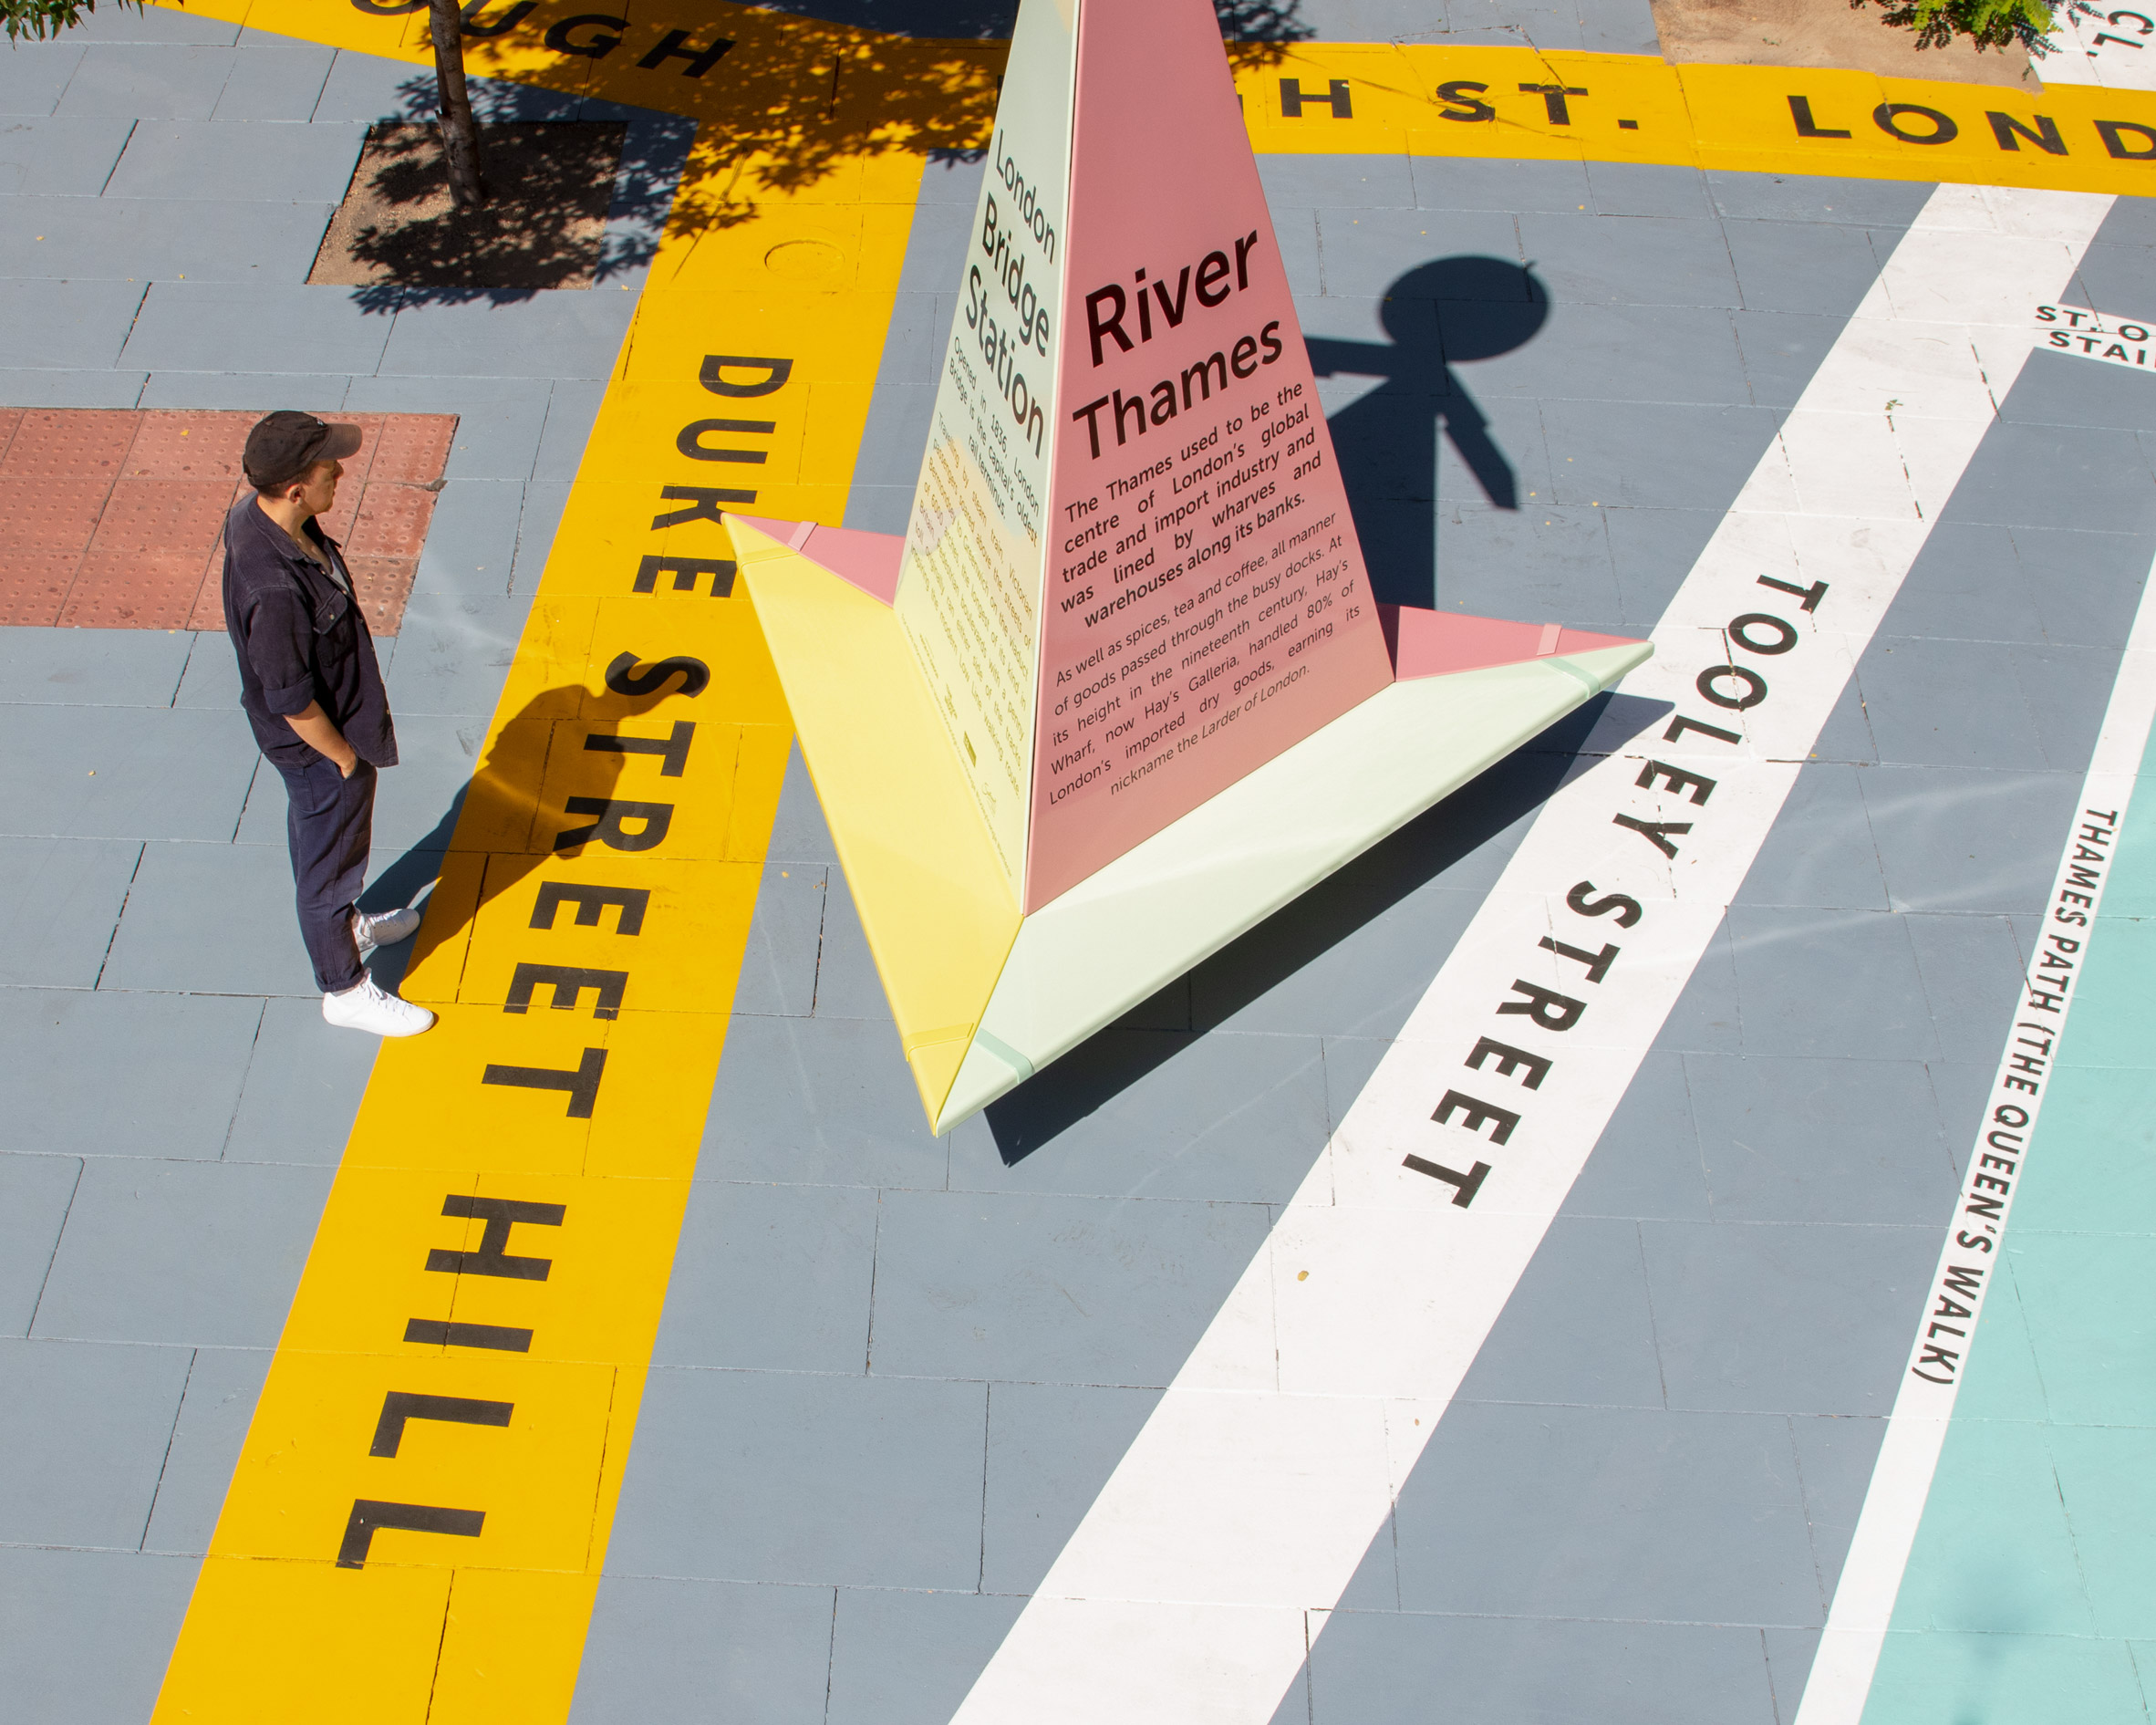 Charles Holland Architects designs The Tooley Street Triangle wayfinding installation for the London Festival of Architecture